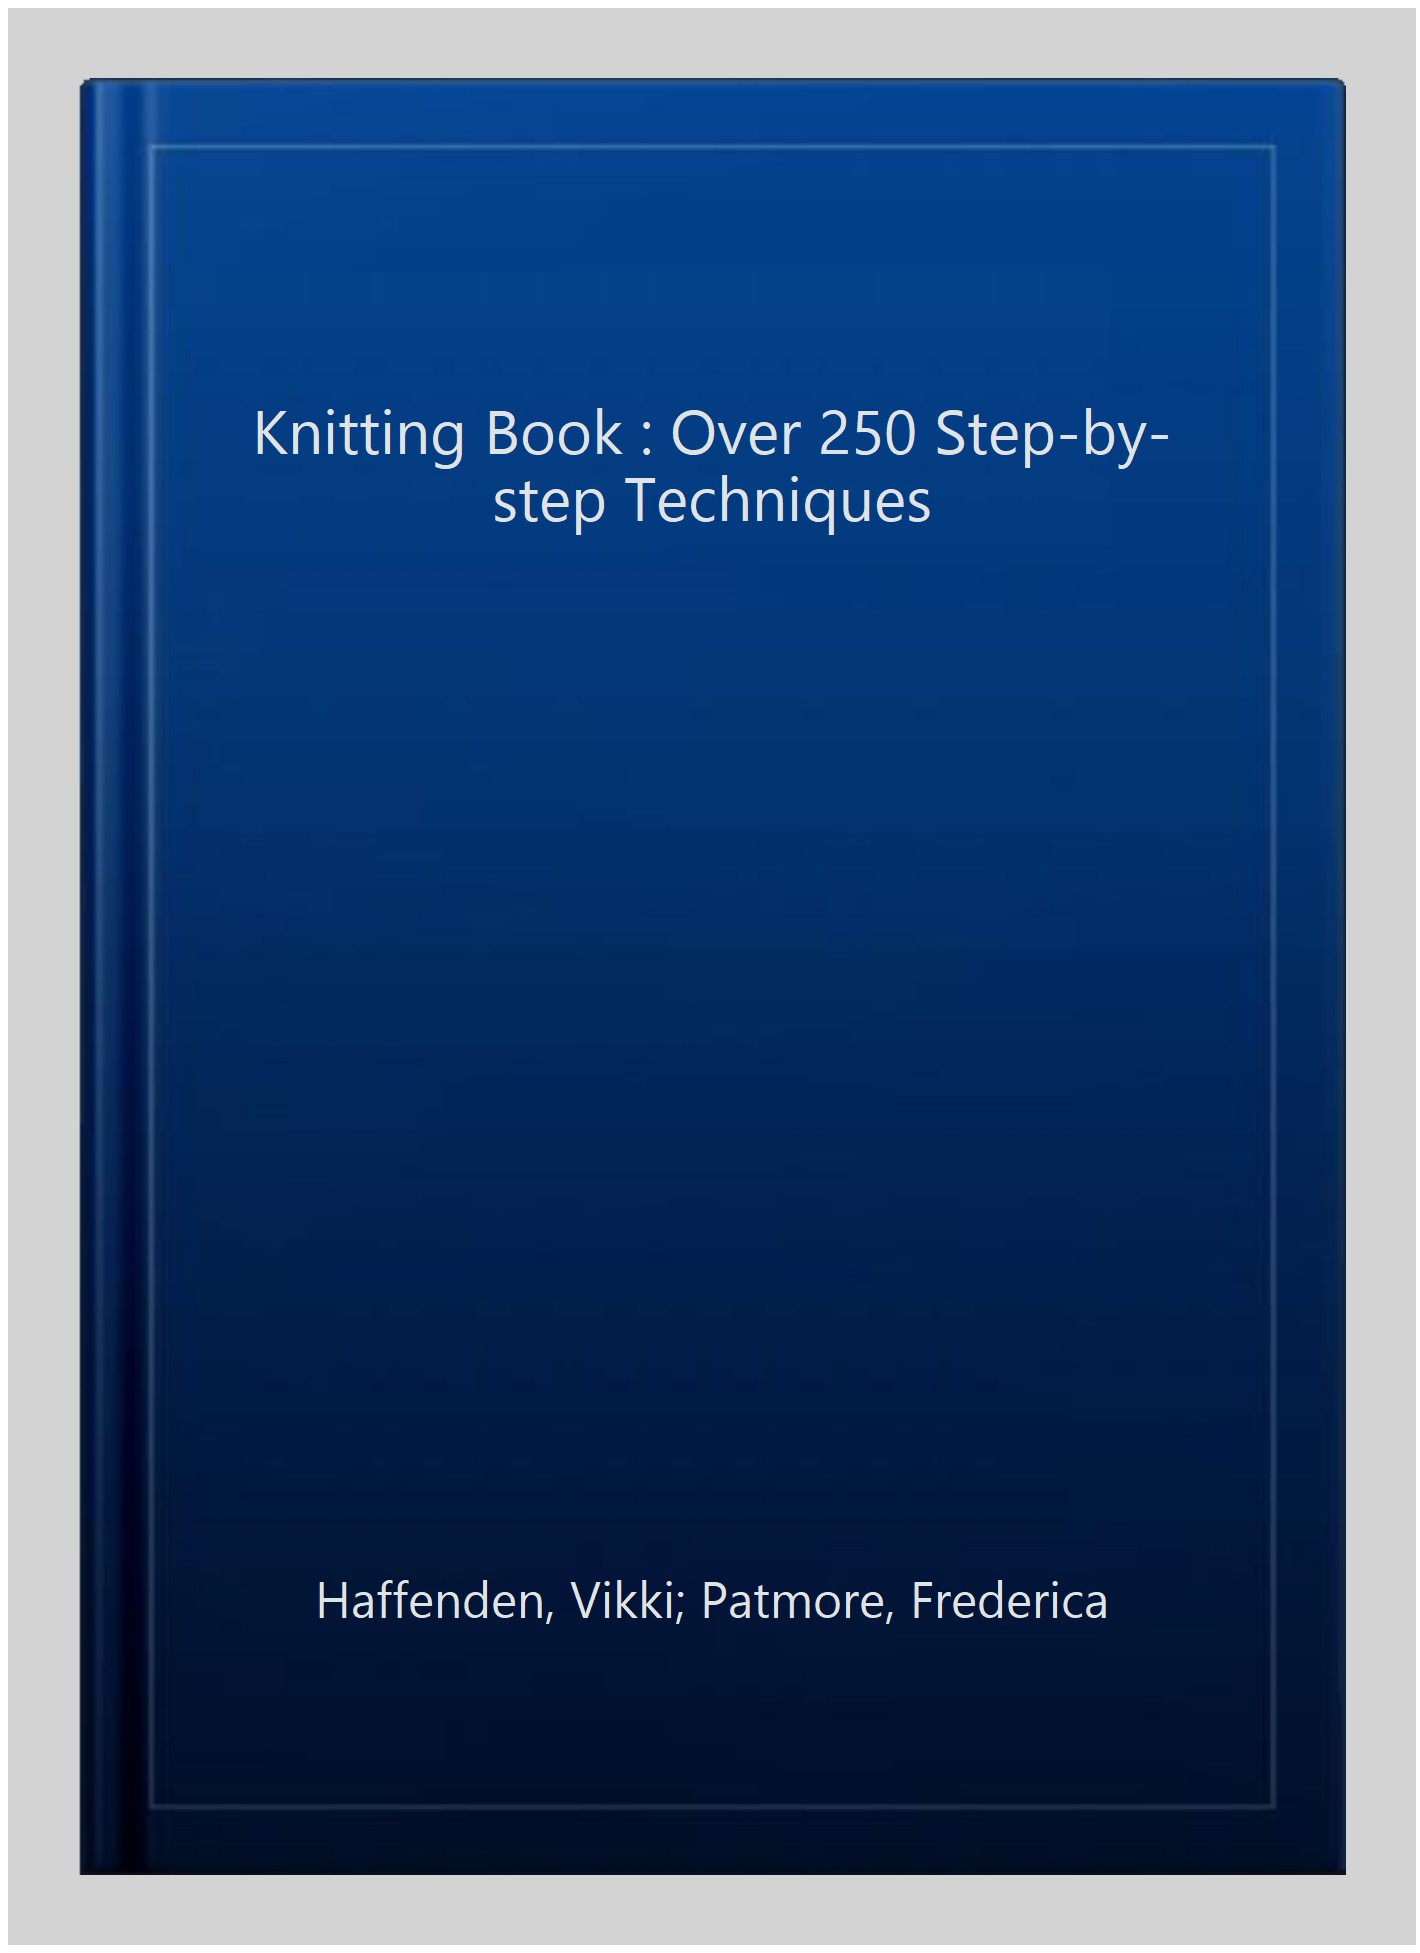 The Knitting Book: Over 250 Step-by-Step Techniques [Book]